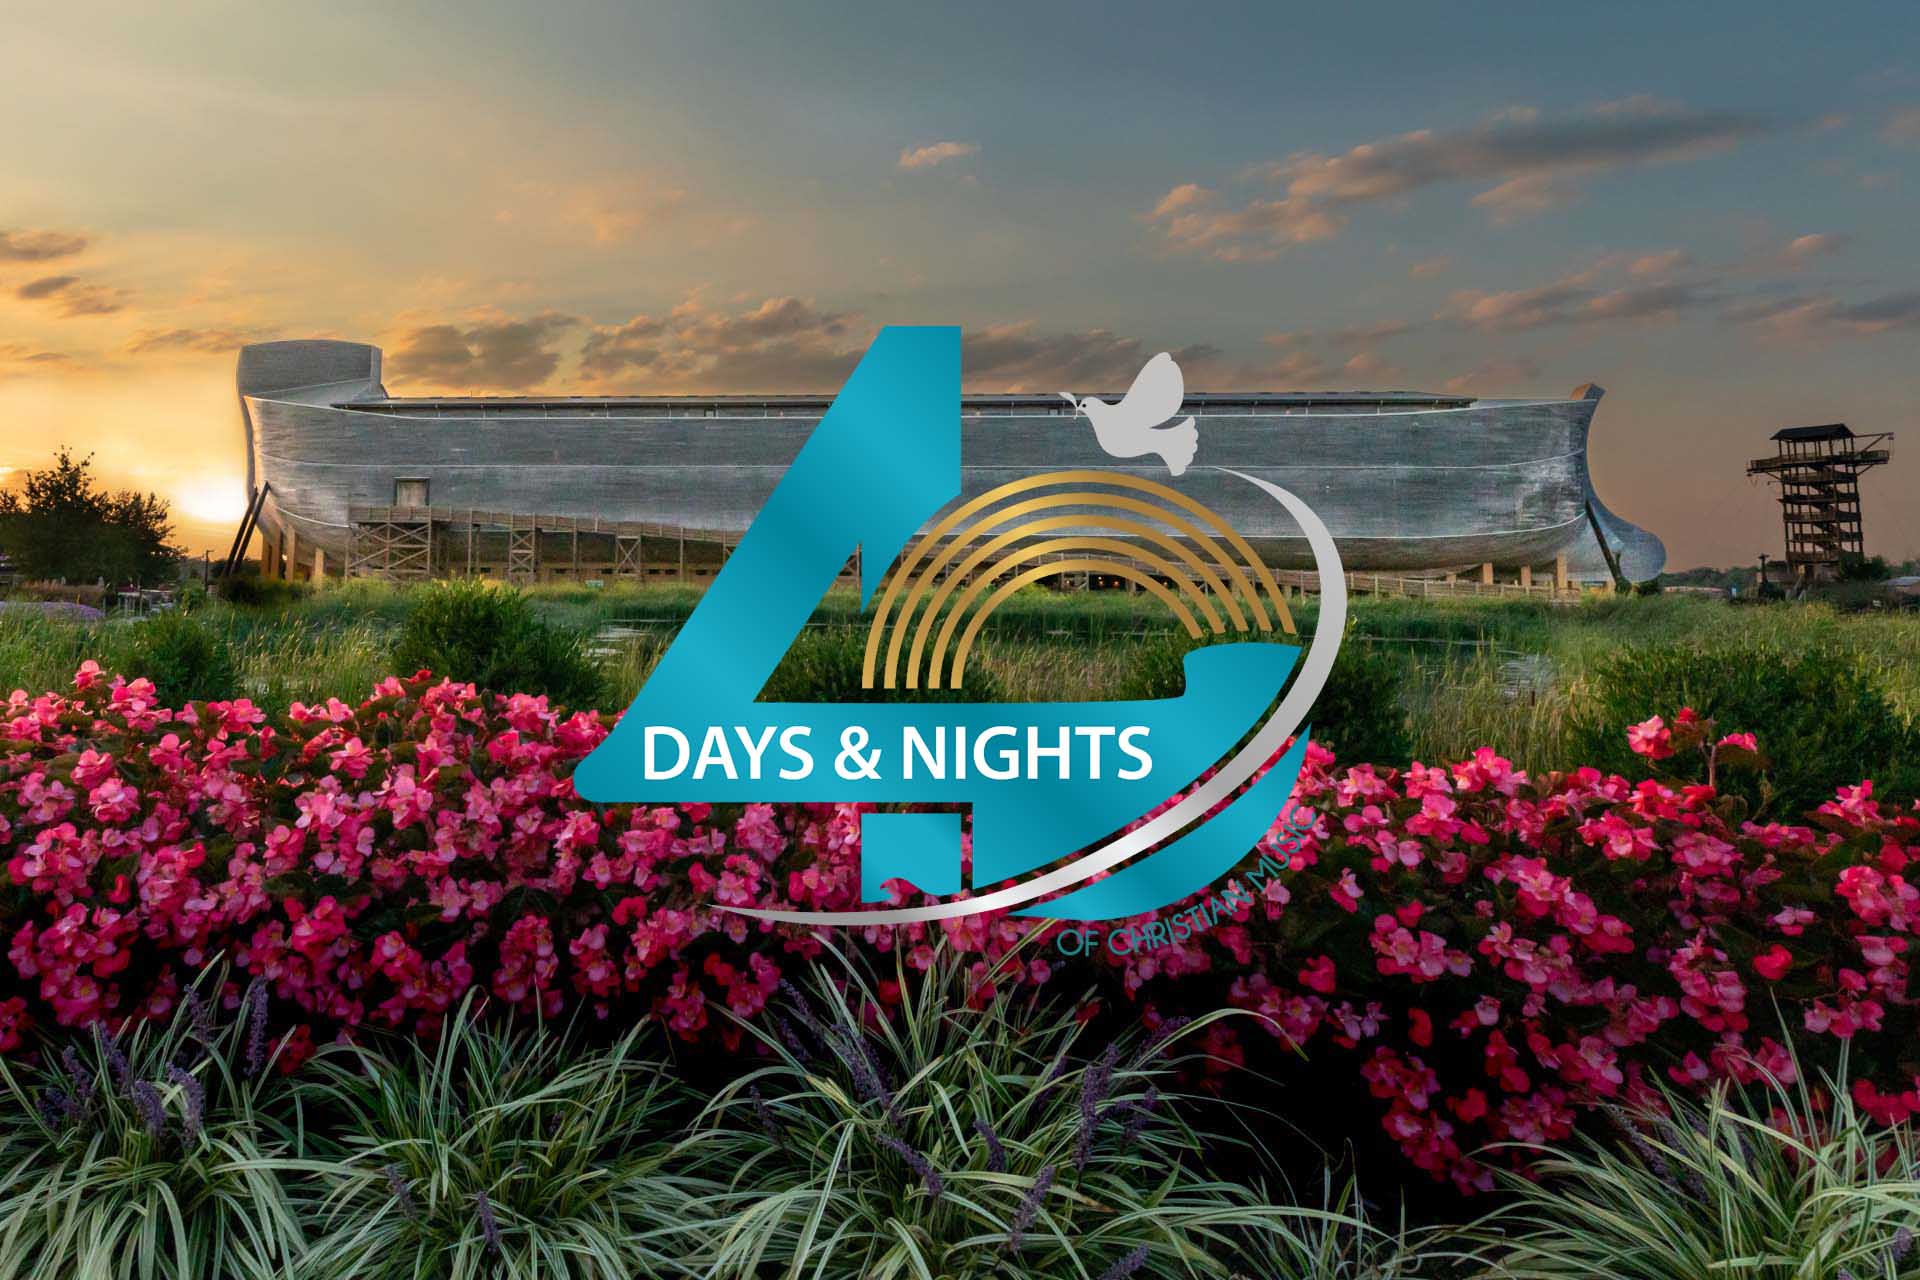 Abraham Productions | 40 Days & Nights Of Christian Music